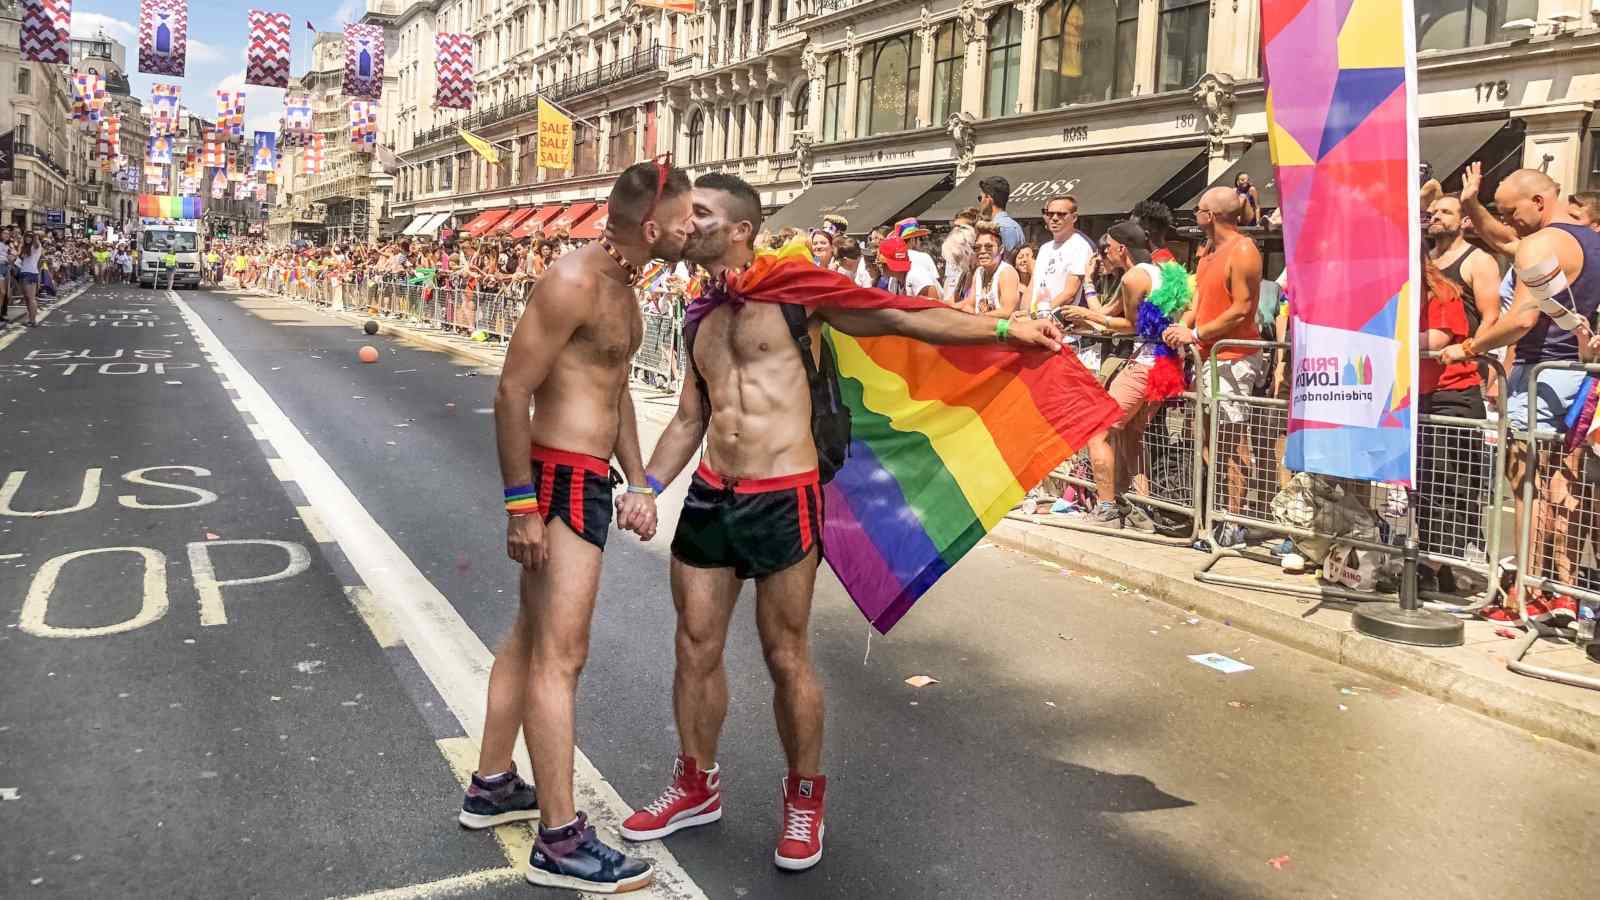 London is a very gay friendly city, especially during Pride